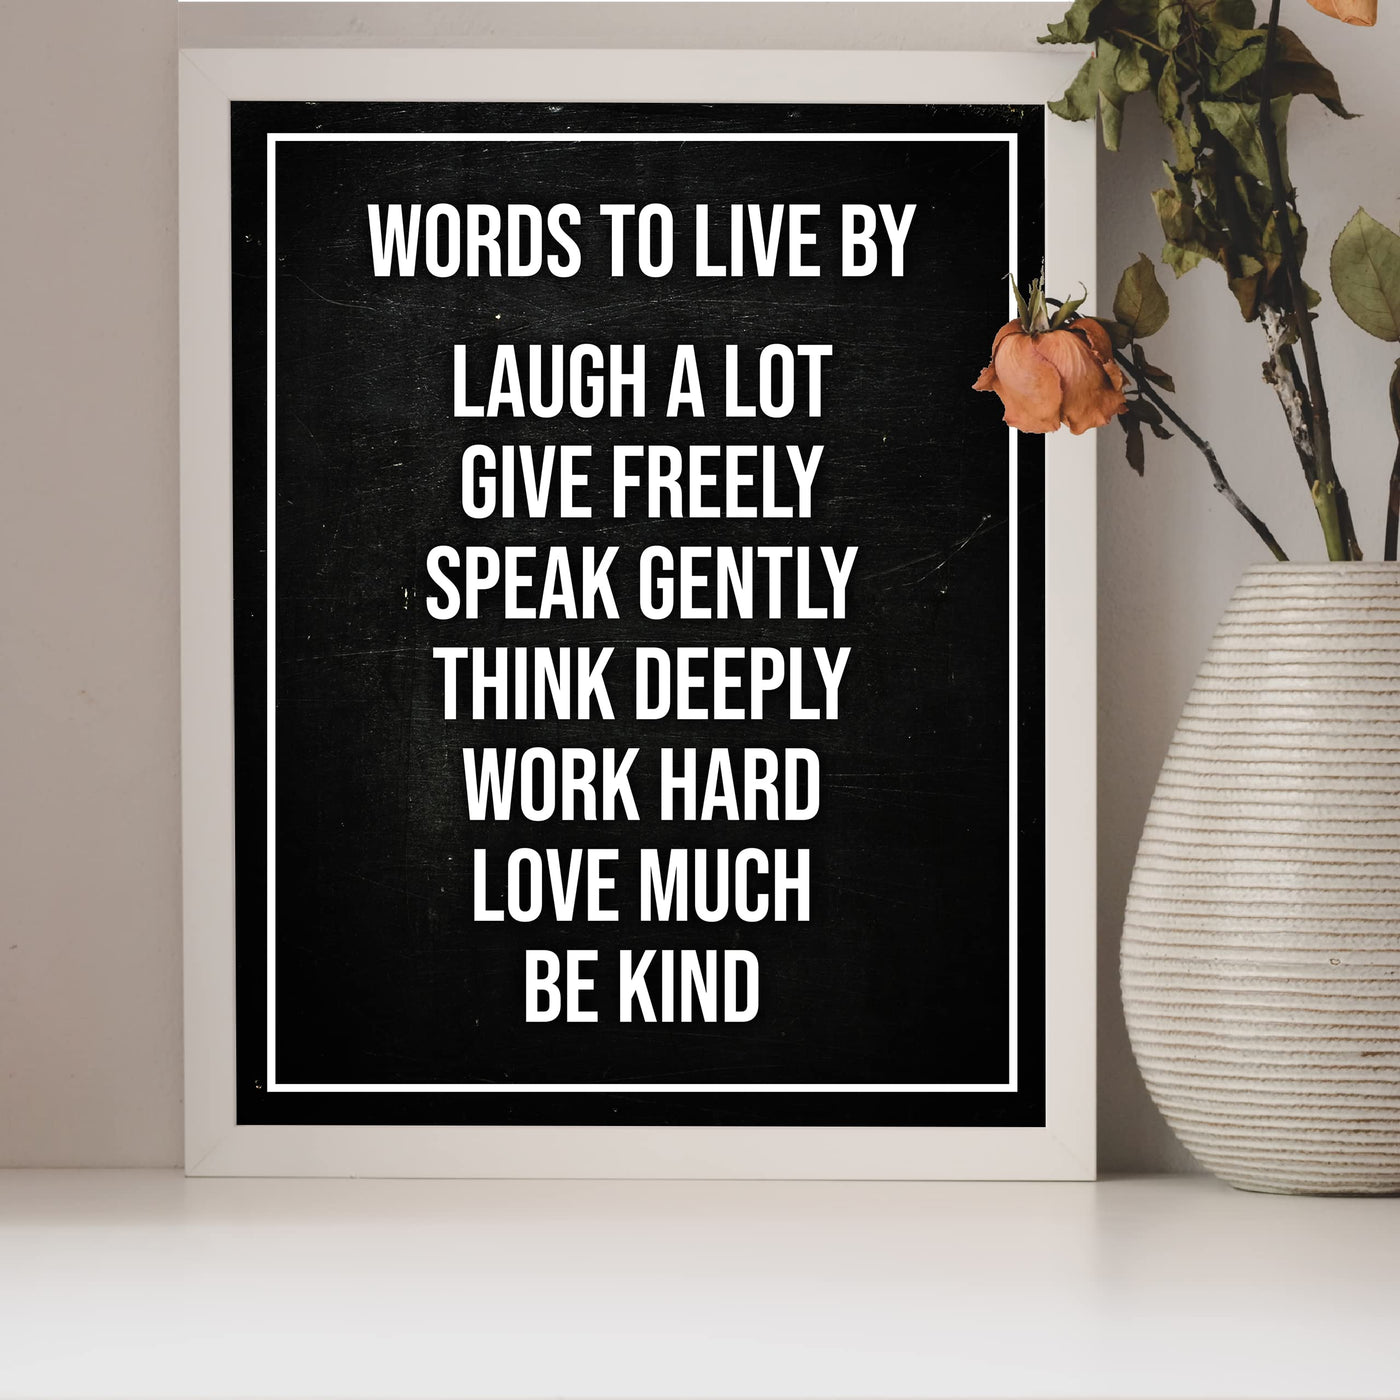 Words to Live By Inspirational Quotes Wall Sign -8 x 10" Motivational Typography Art Print-Ready to Frame. Rustic Decor for Home-Office-School-Work. Great Life Lessons for Motivation & Inspiration!